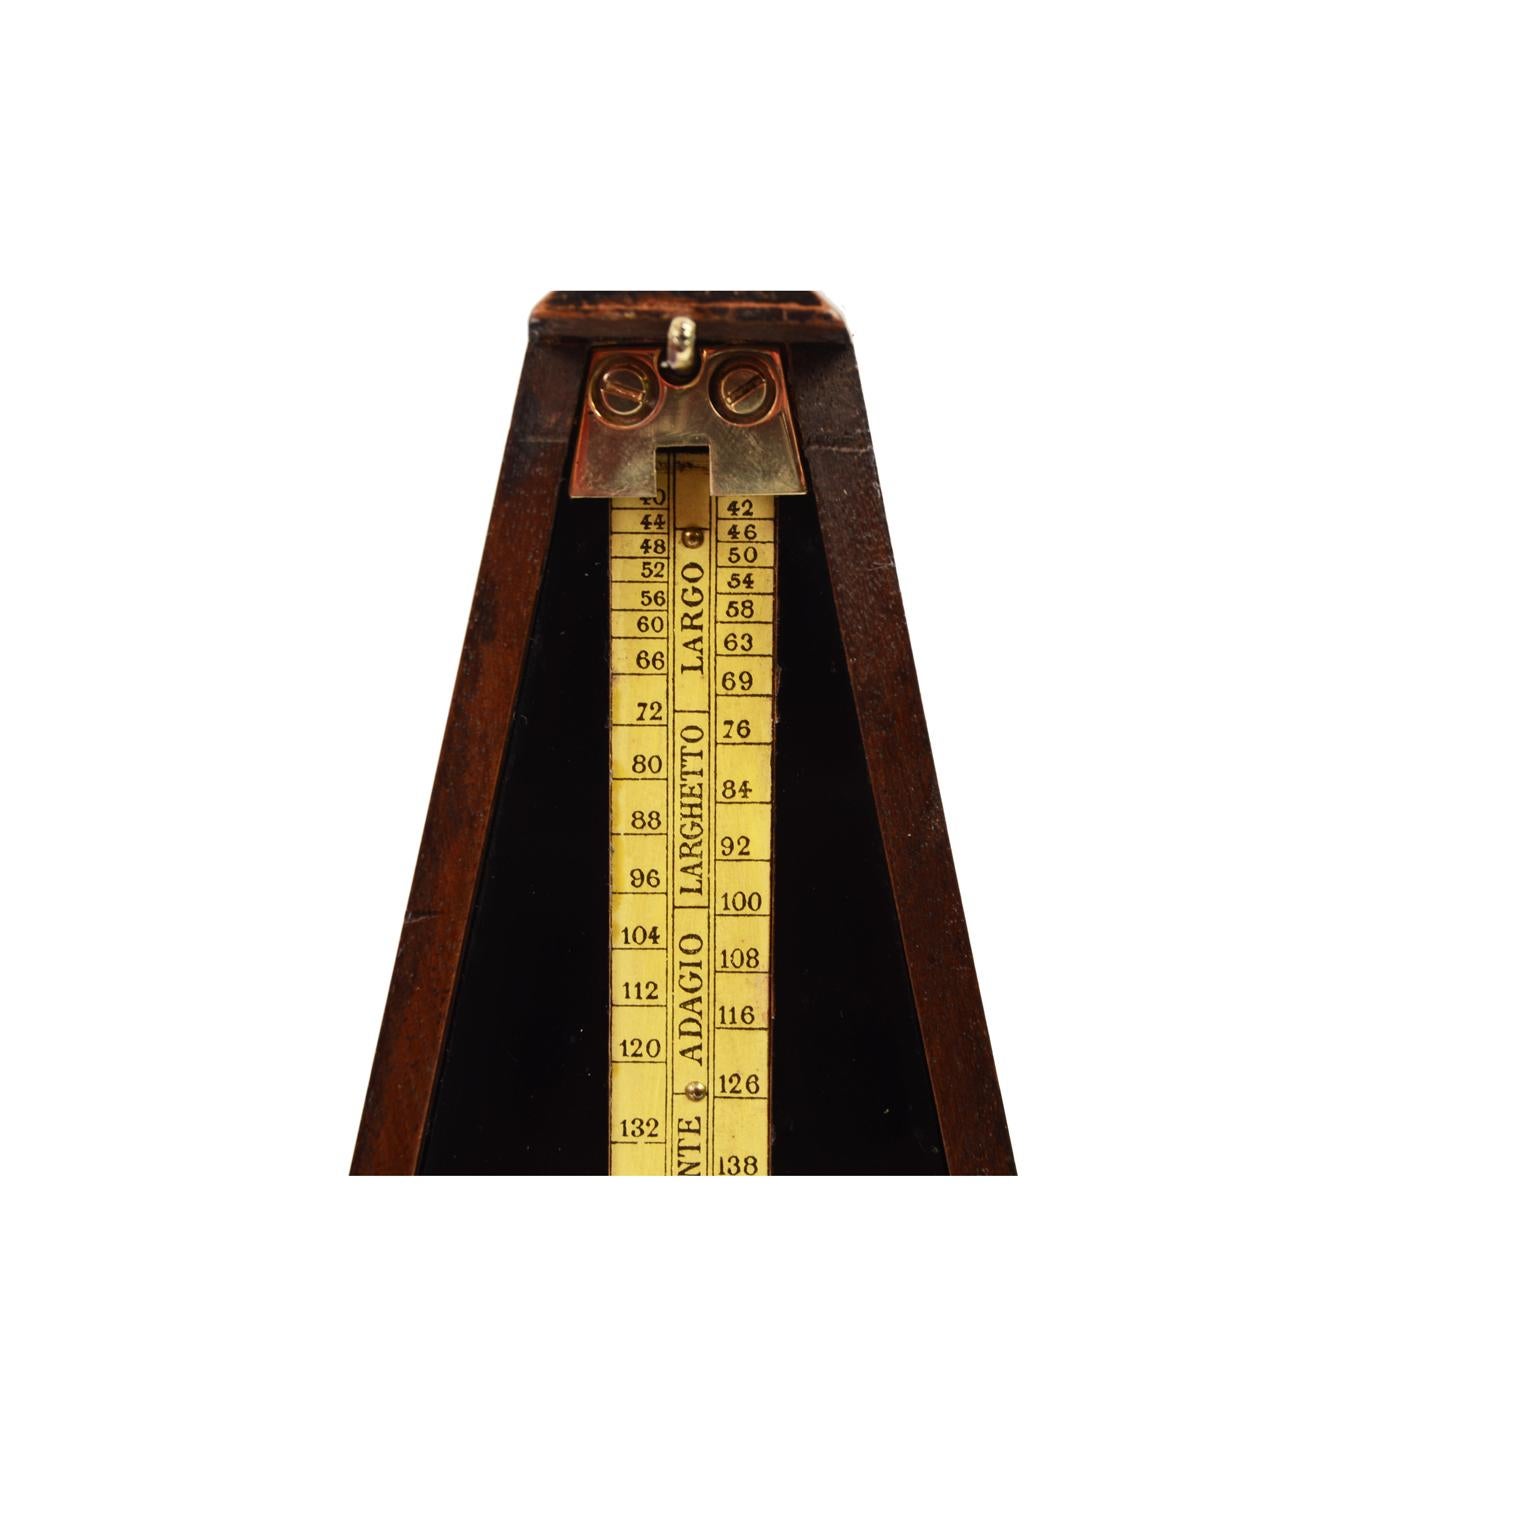 Wood Metronome Johan Maelzel Antique Musical Measuring Instrument made in Early 1900s